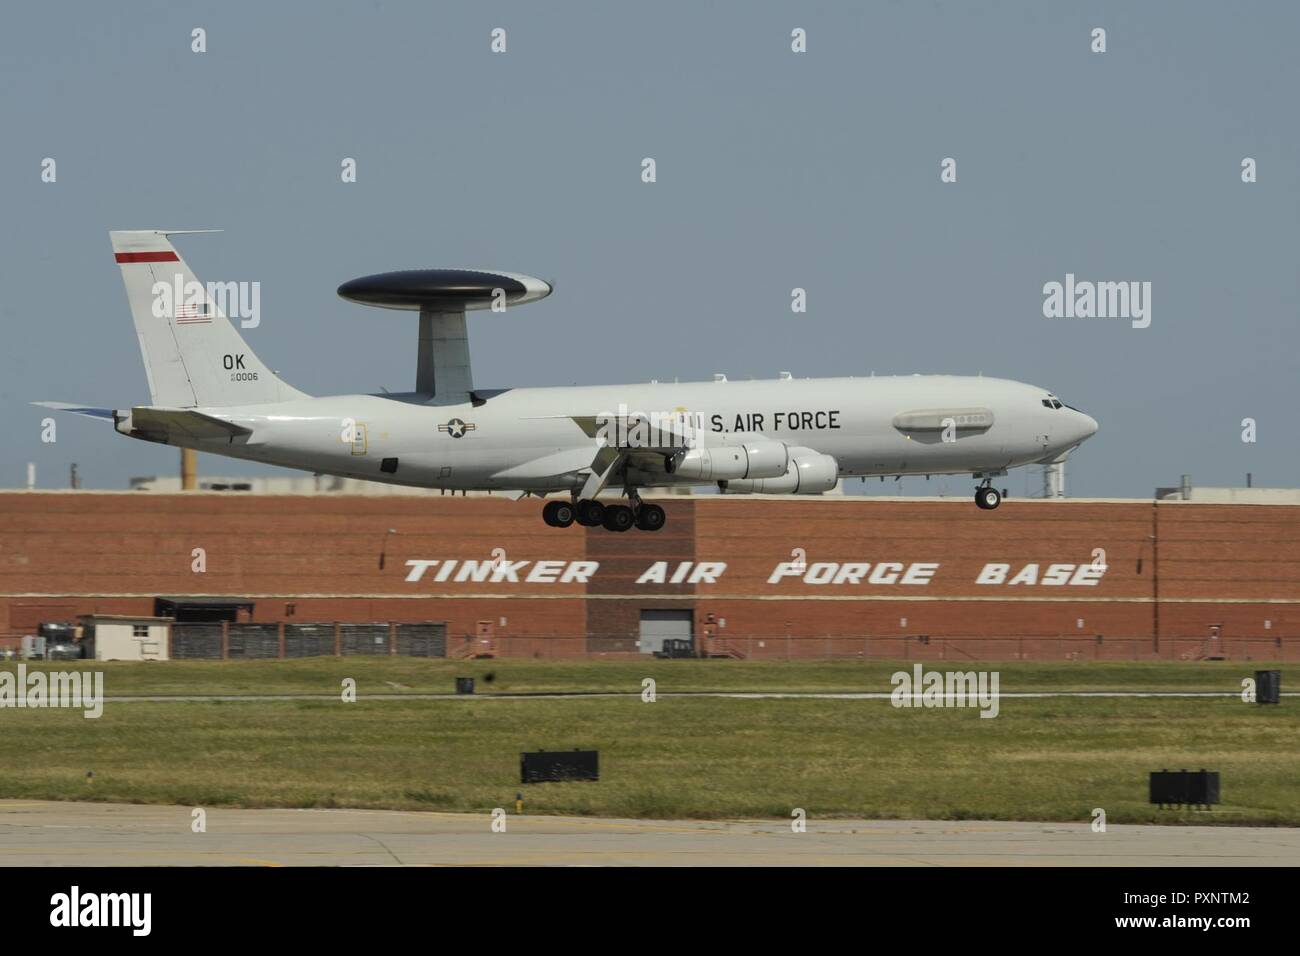 A Boeing E-3G Airborne Warning and Control System aircraft on final approach to land June 16, 2017, Tinker Air Force Base, Oklahoma. The large building behind the E-3 AWACS is building 3001, a former Douglas Aircraft manufacturing plant during World War II, now used by the Oklahoma City Air Logistics Complex and its parent organization the Air Force Sustainment Center. The E-3 is operated by the 552nd Air Control Wing, Air Combat Command, from Tinker AFB where heavy maintenance of the E-3 airframe and engines is also conducted by the OC-ALC. Stock Photo